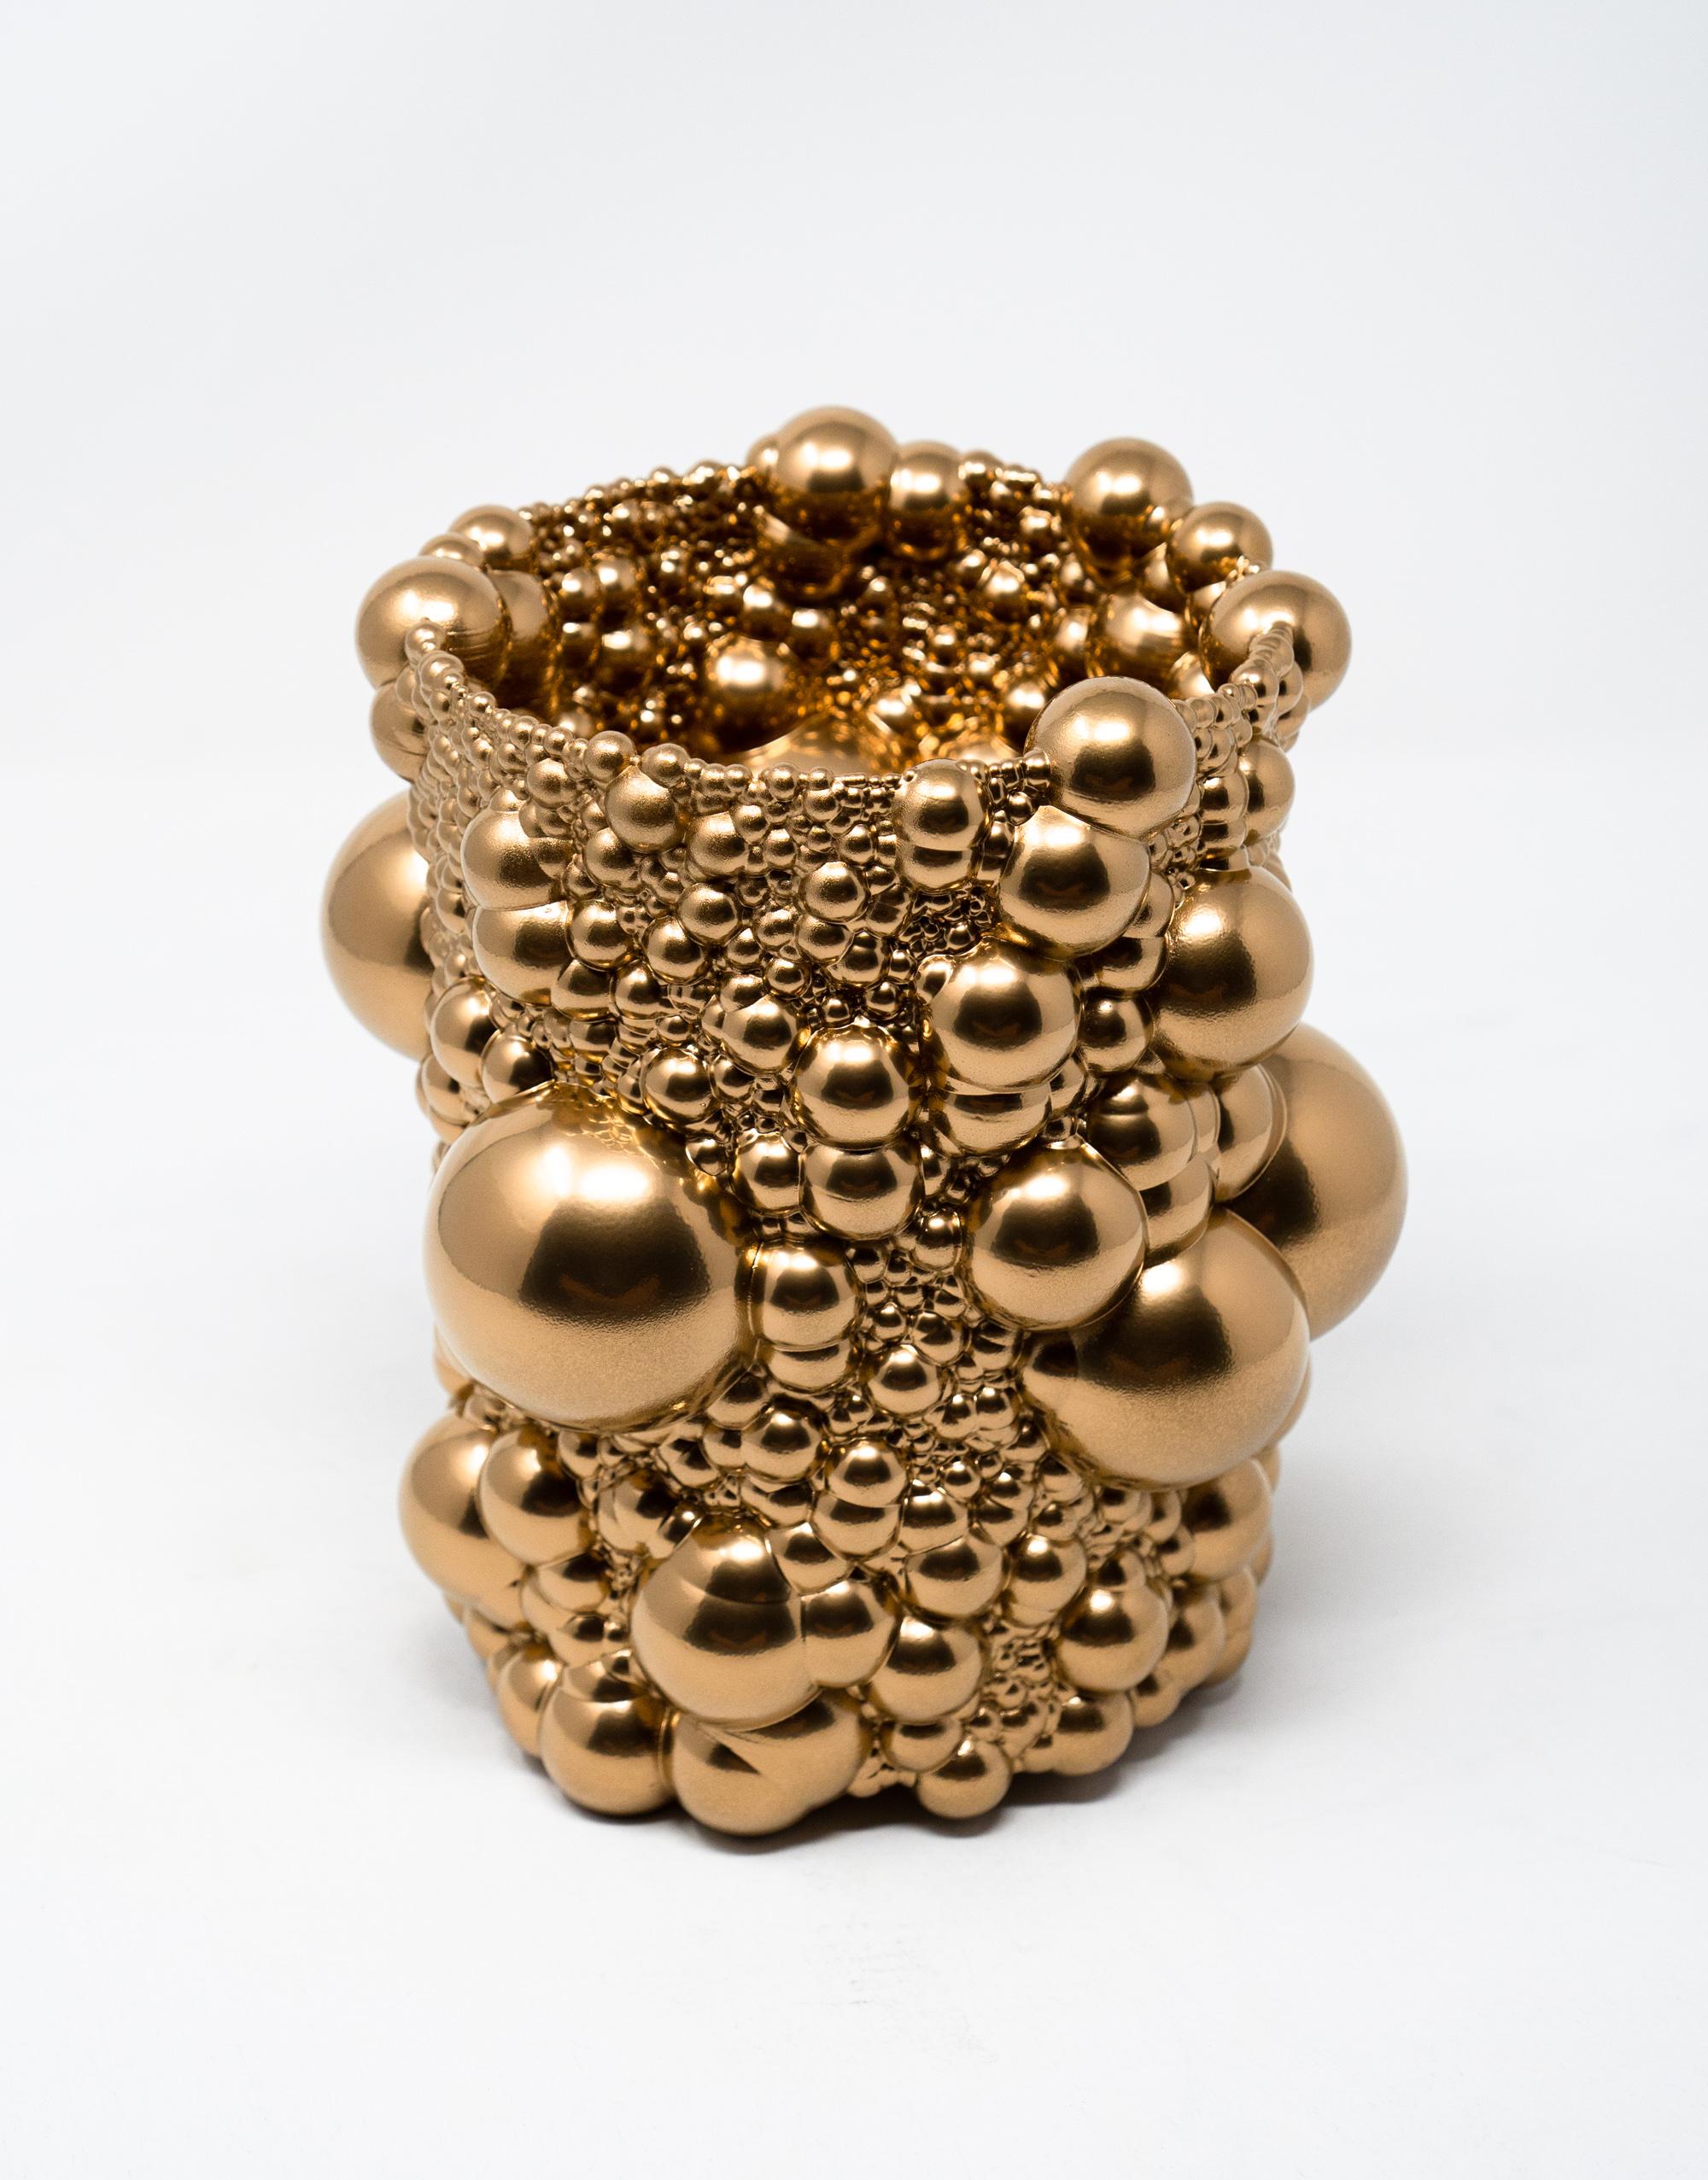 A unique vase procedurally designed from thousands of spheres distributed randomly across a volume. 

Crafted by additive manufacturing, finished by hand and chromed gold in a specialty process.



We live in an ever-expanding universe